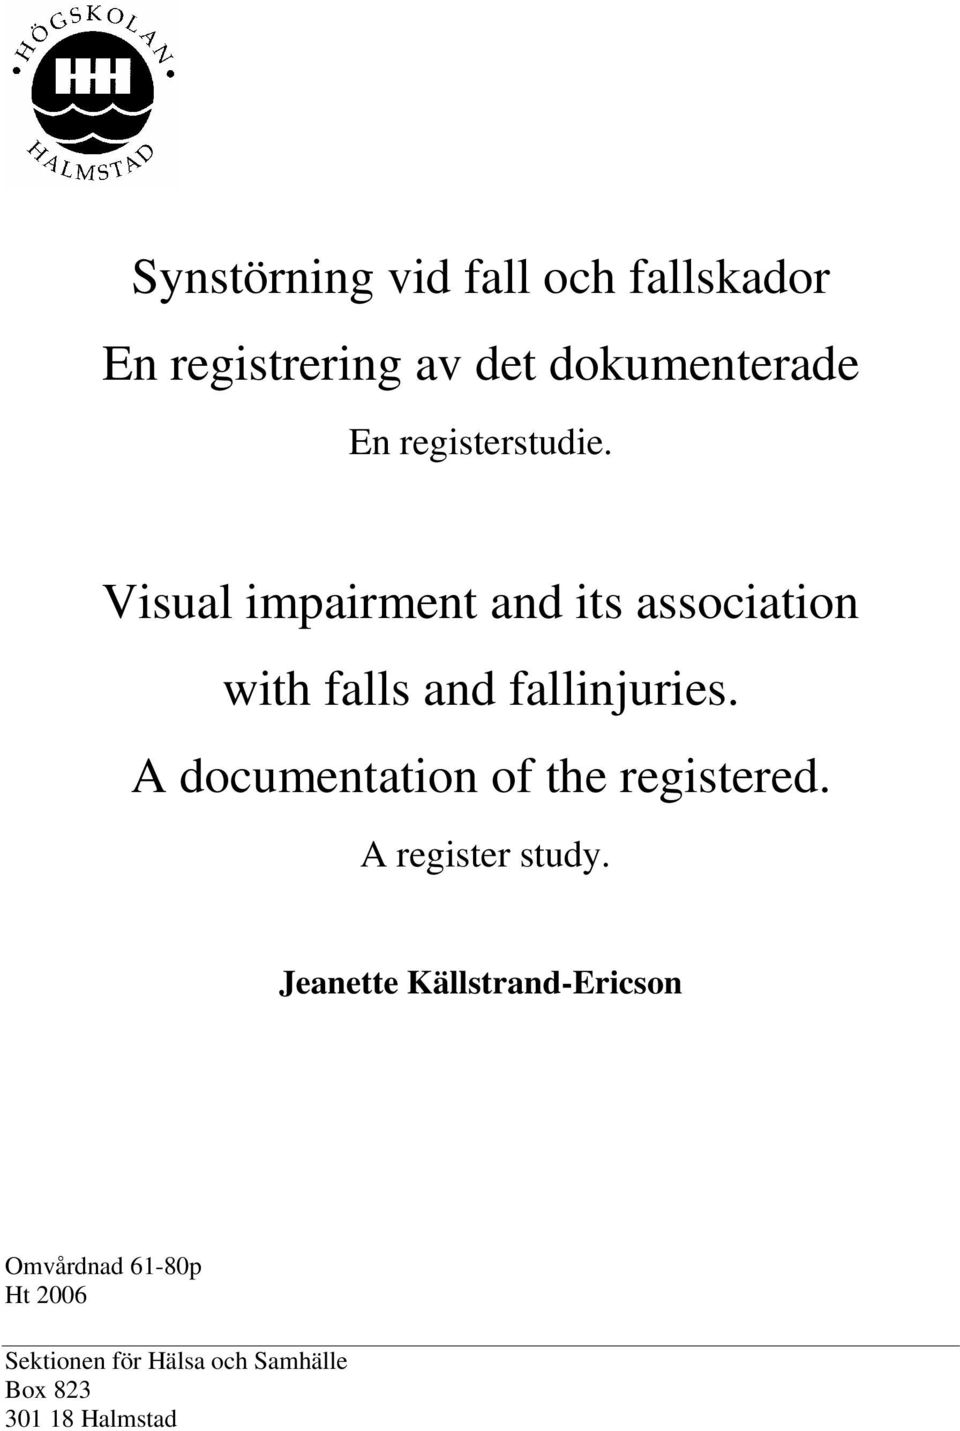 Visual impairment and its association with falls and fallinjuries.